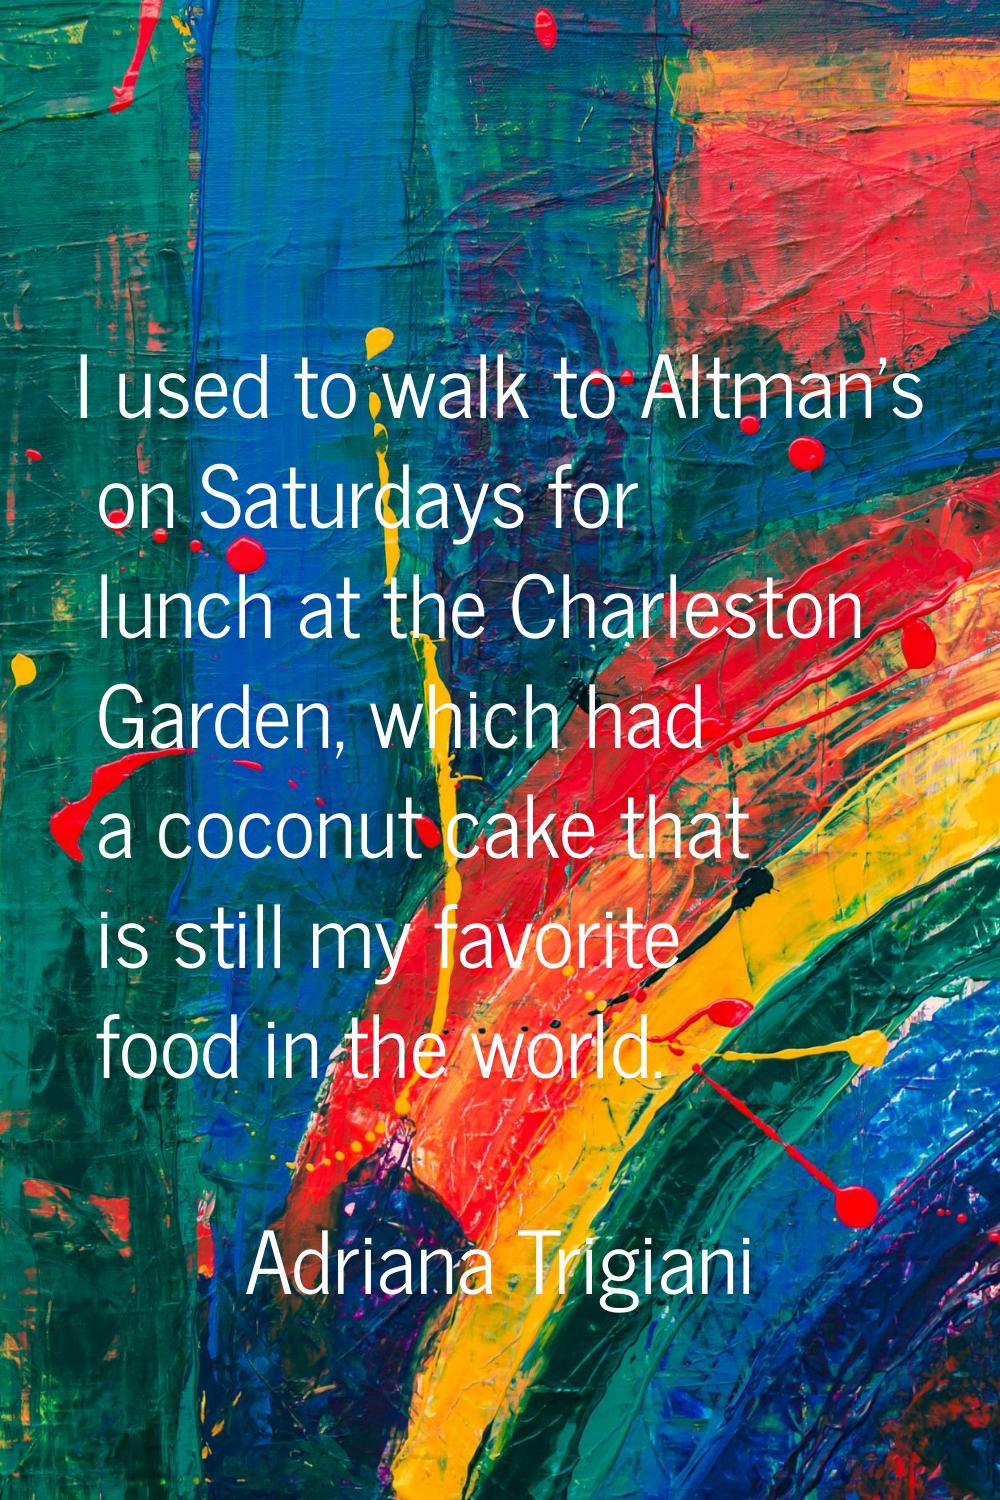 I used to walk to Altman's on Saturdays for lunch at the Charleston Garden, which had a coconut cak